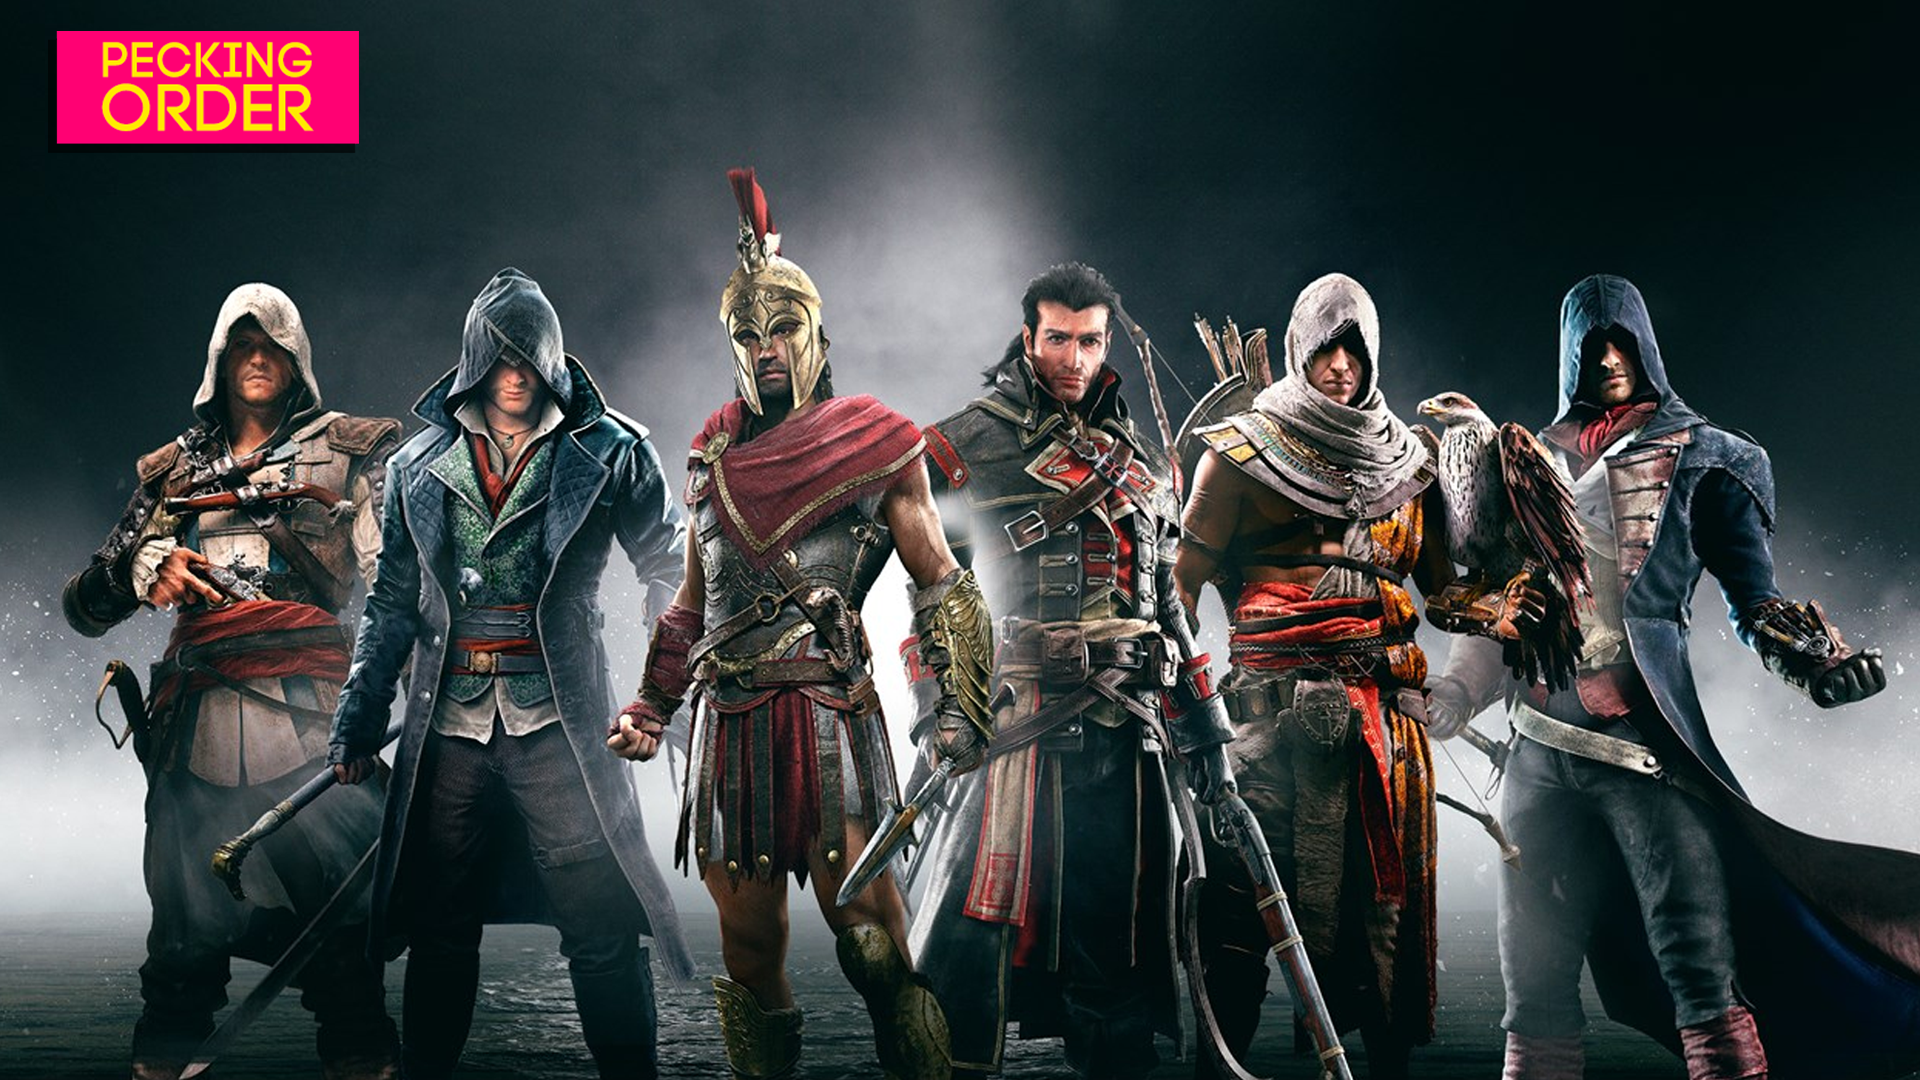 When playing the Assassin's Creed franchise, do you need to play the  previous installments to understand the story? Can you just pick up any  game in the series, play, understand, and enjoy